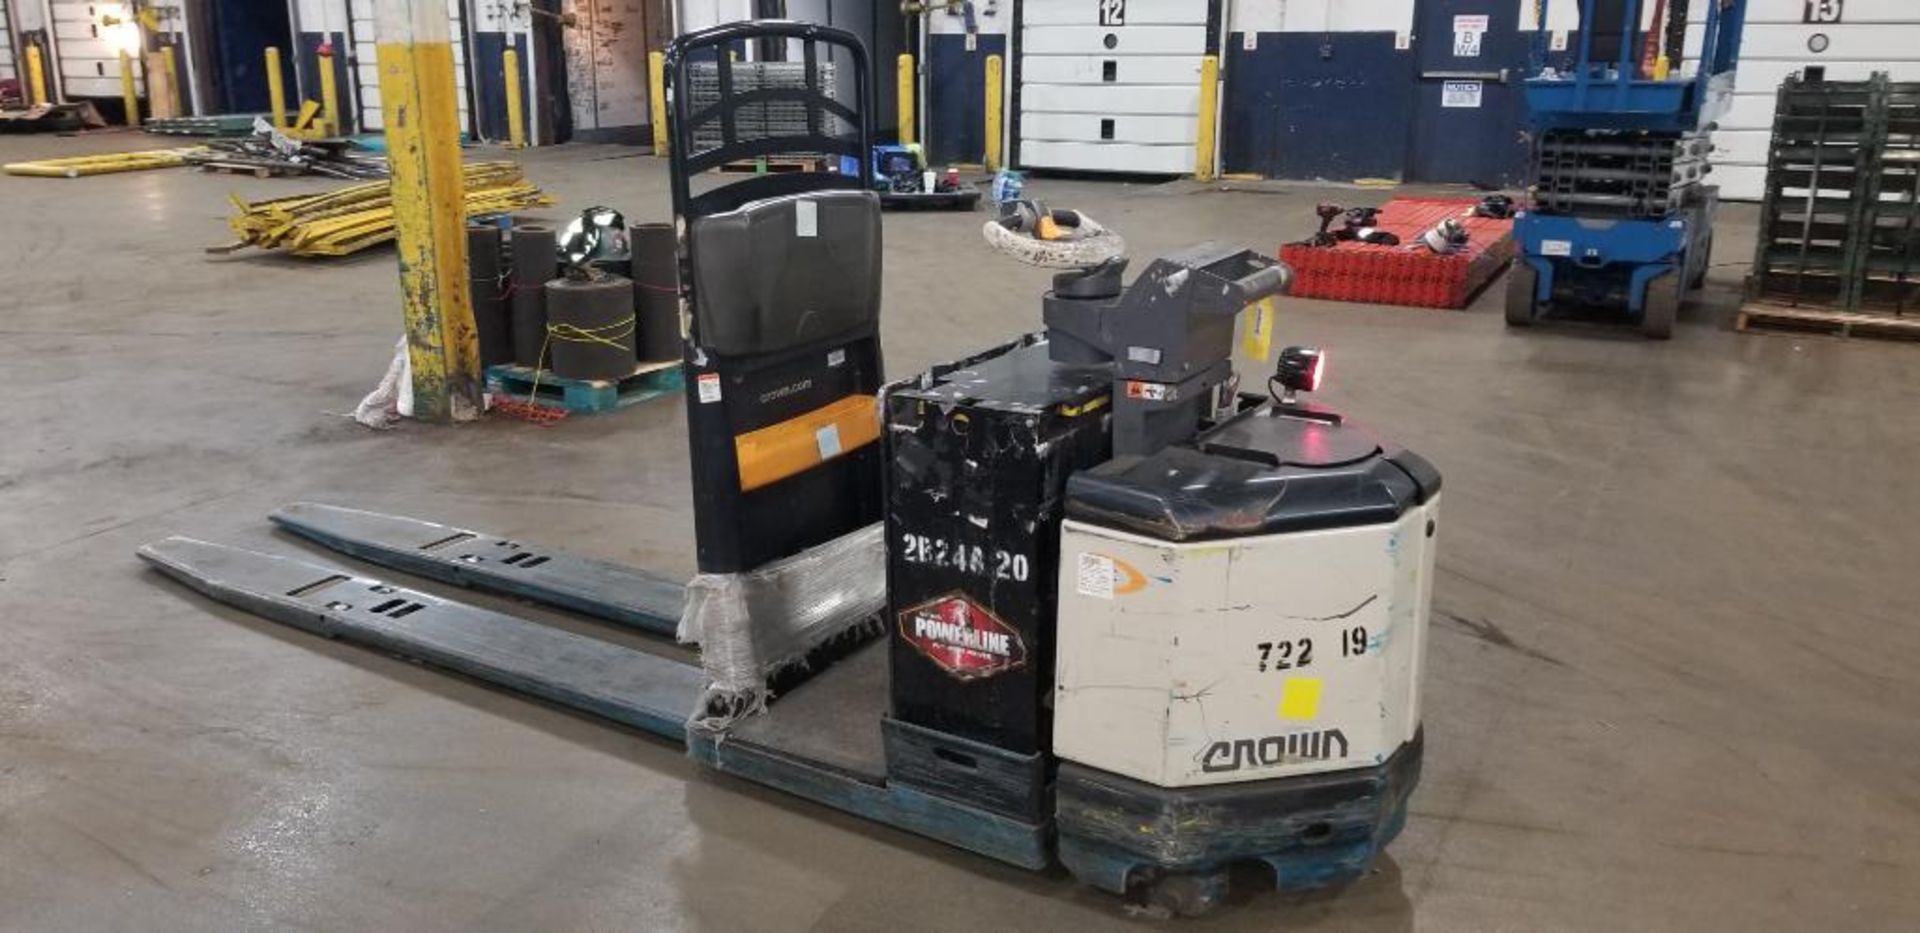 2019 Crown PC 4500 Series End Control Double Pallet Truck, Model PC4500-80, S/N 10141763, 8,000 LB. - Image 2 of 6